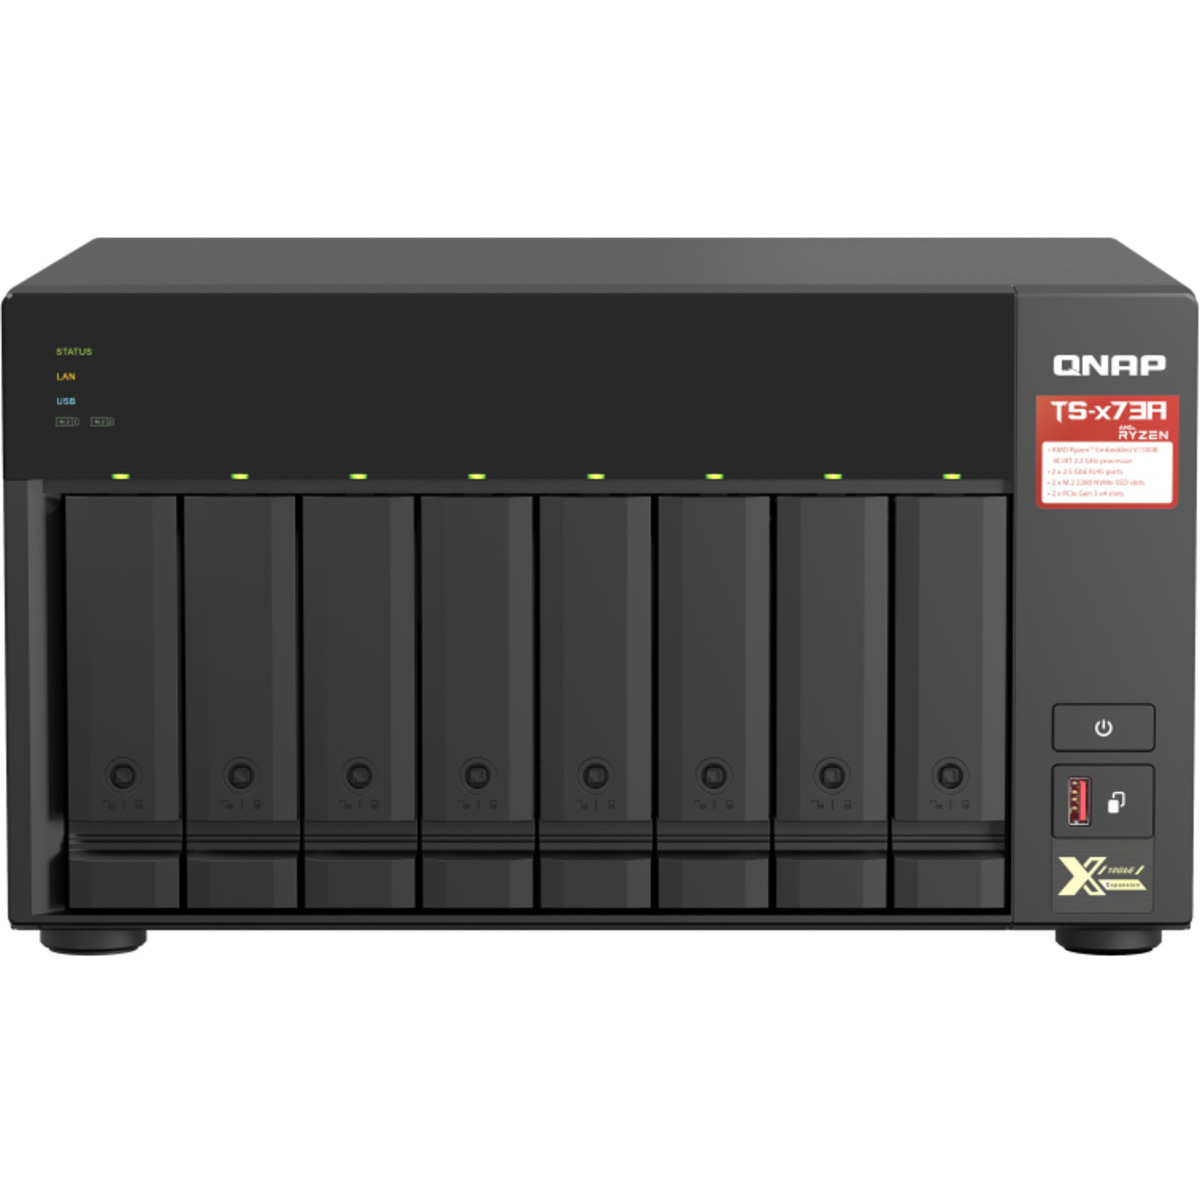 buy $3880 QNAP TS-873A 128tb Desktop NAS - Network Attached Storage Device 8x16000gb Toshiba Enterprise Capacity MG08ACA16TE 3.5 7200rpm SATA 6Gb/s HDD ENTERPRISE Class Drives Installed - Burn-In Tested - nas headquarters buy network attached storage server device das new raid-5 free shipping usa TS-873A